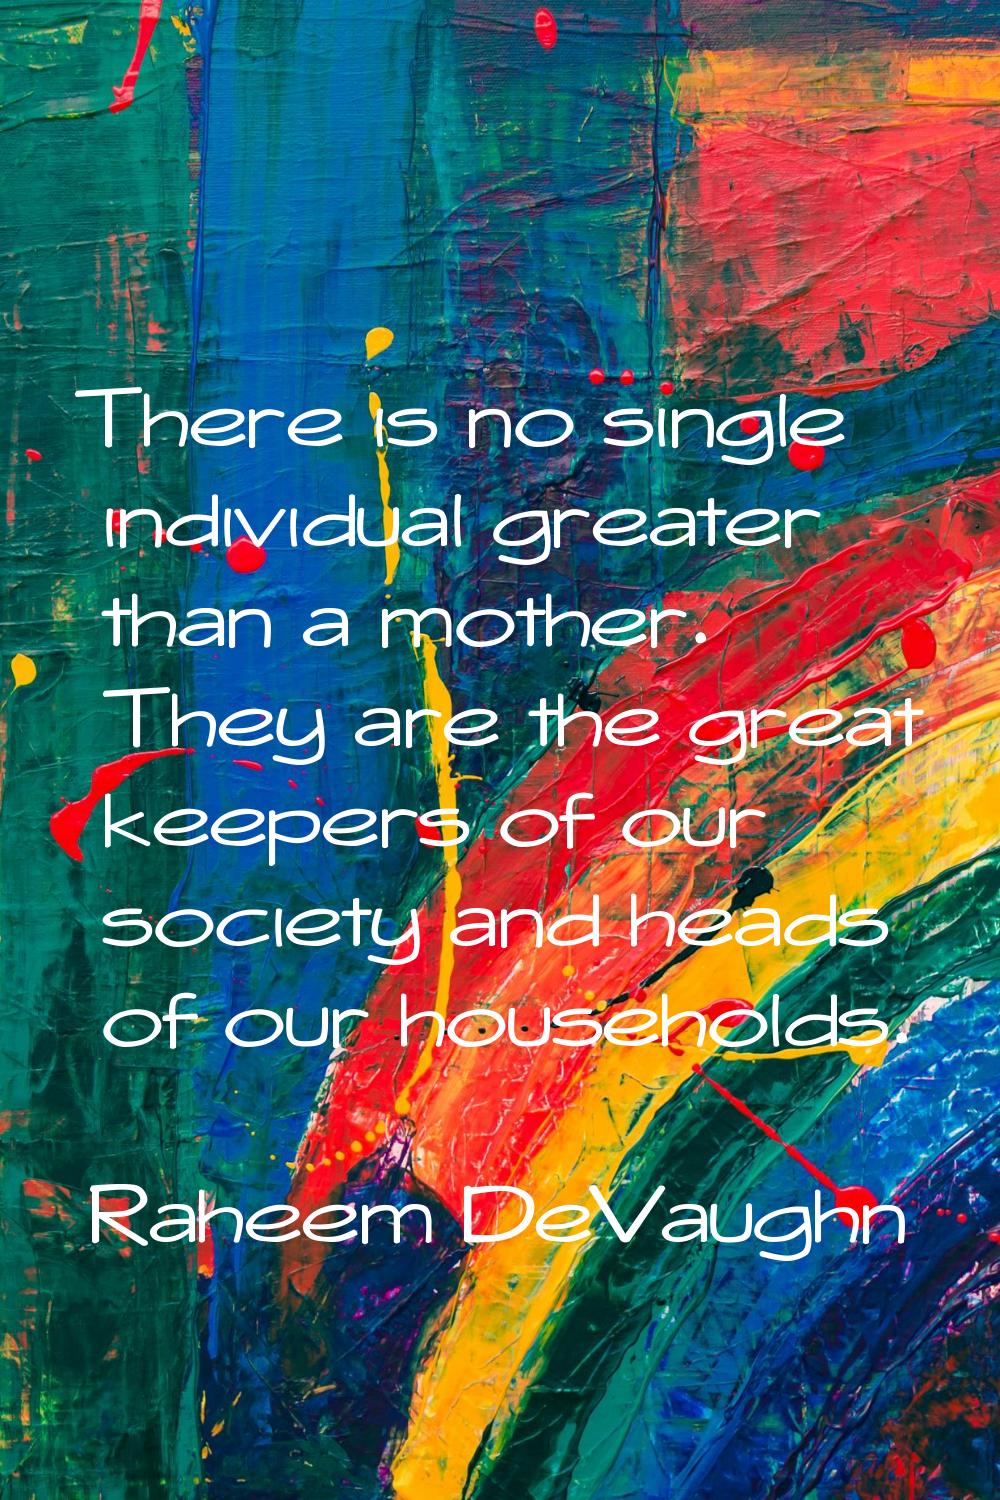 There is no single individual greater than a mother. They are the great keepers of our society and 